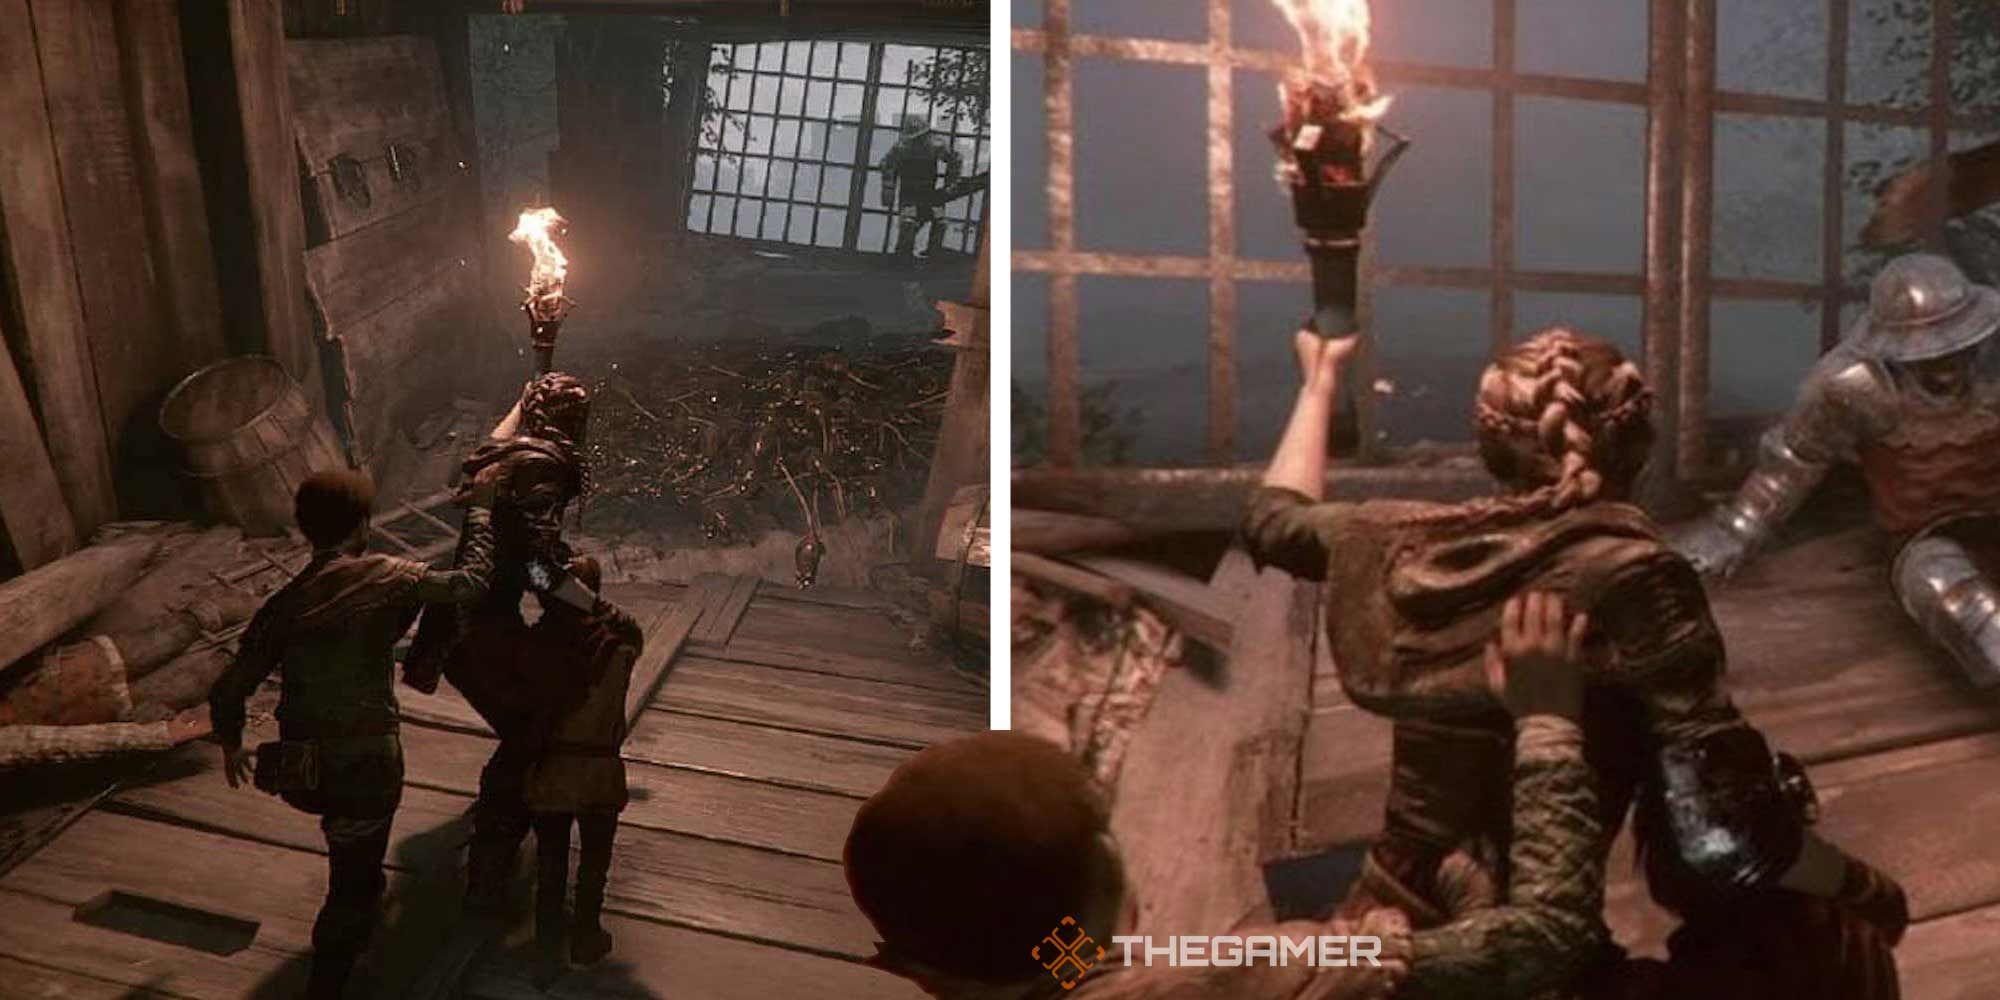 How to Save Your Game in A Plague Tale: Innocence – GameSpew